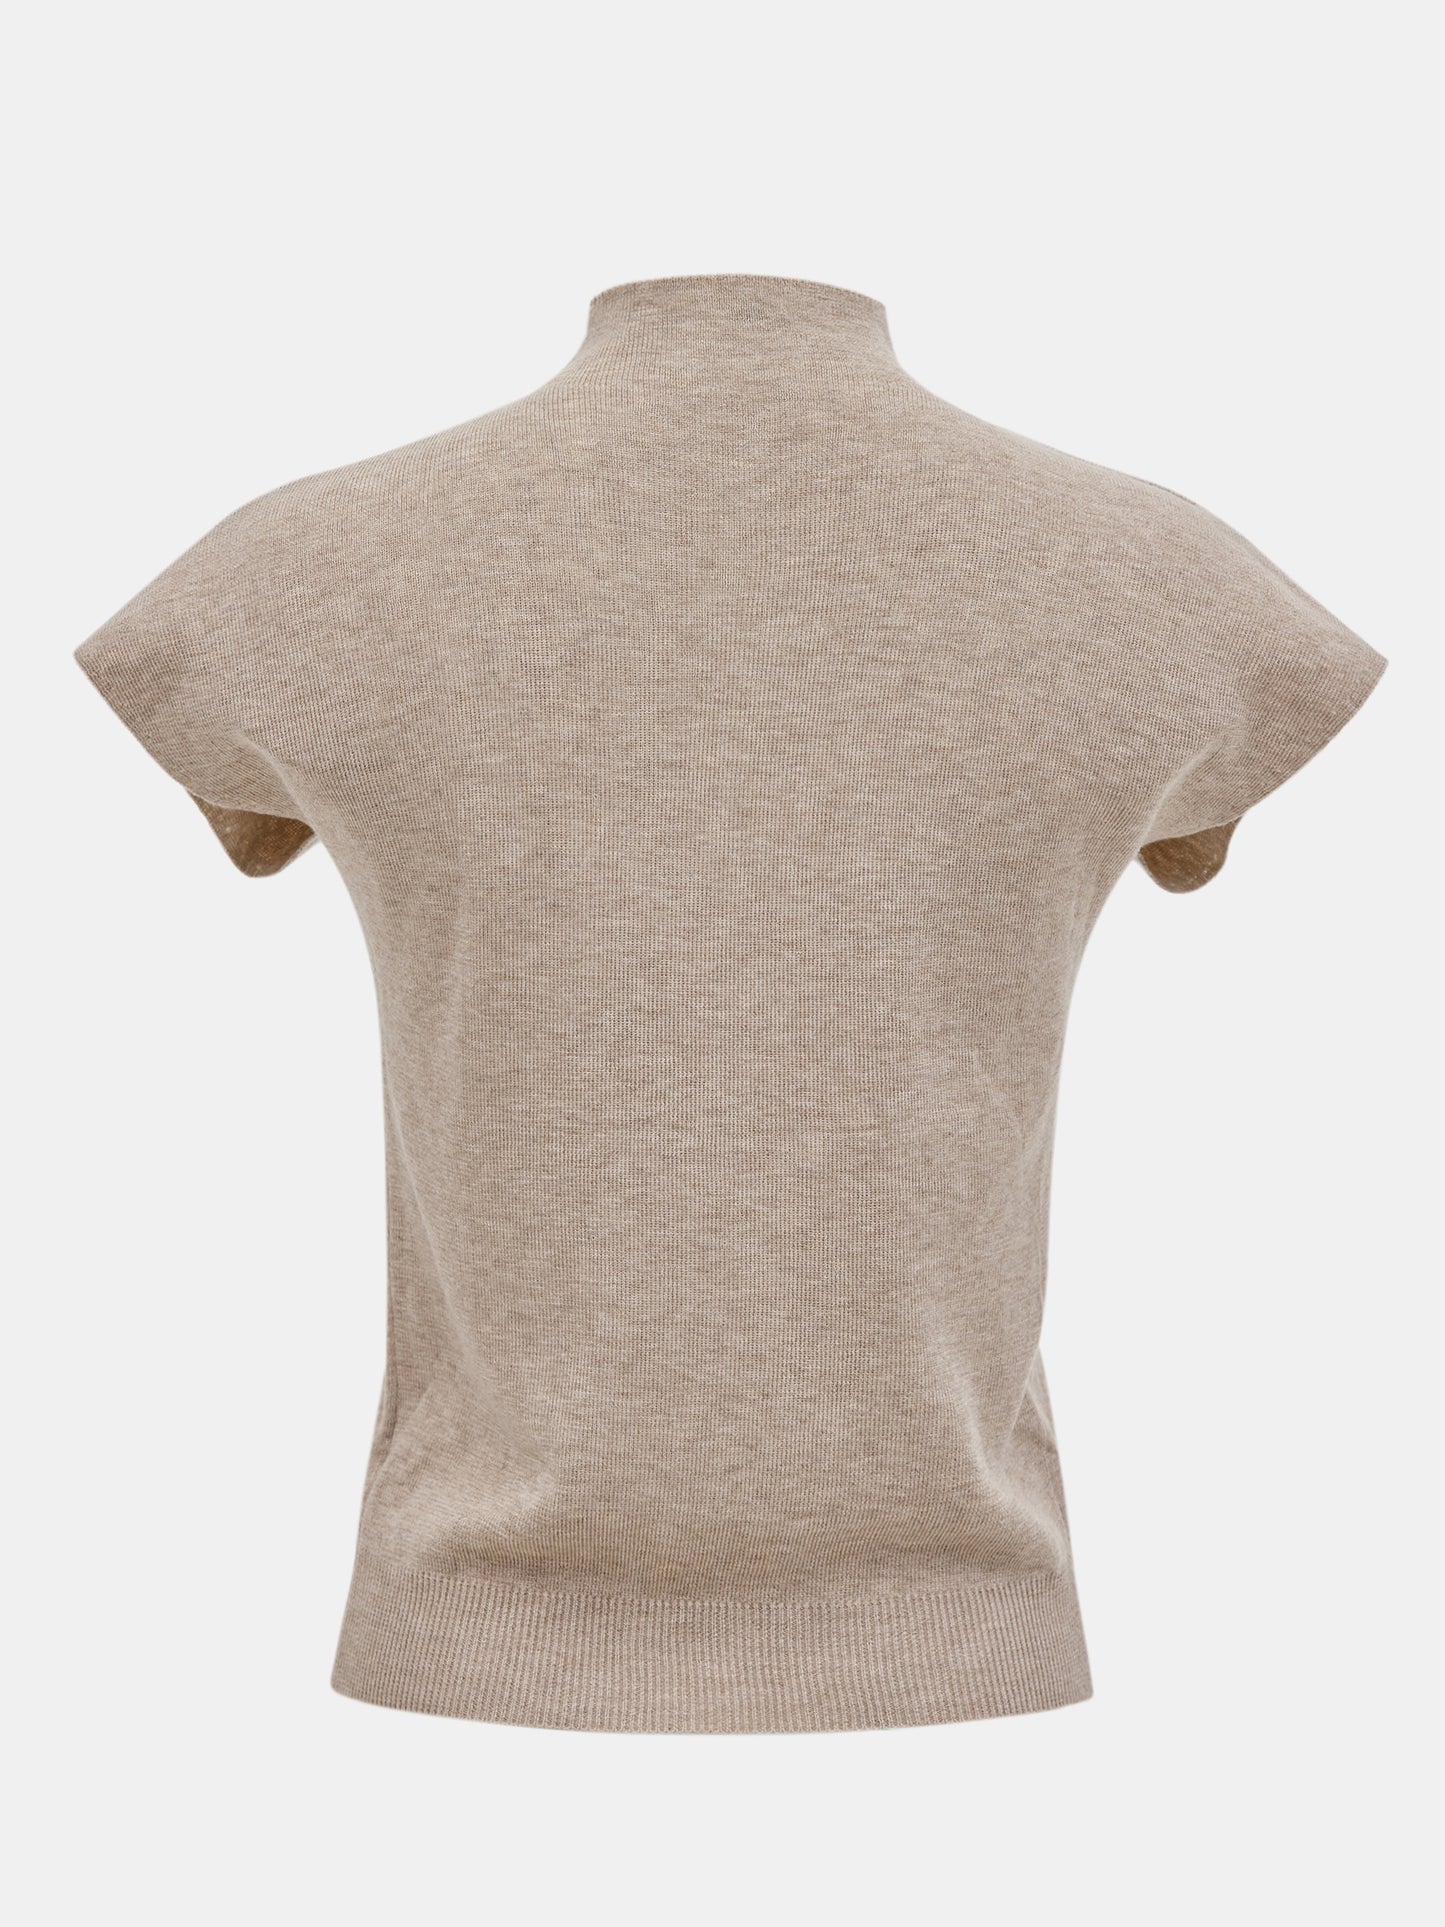 High-Neck Compact Knit, Beige